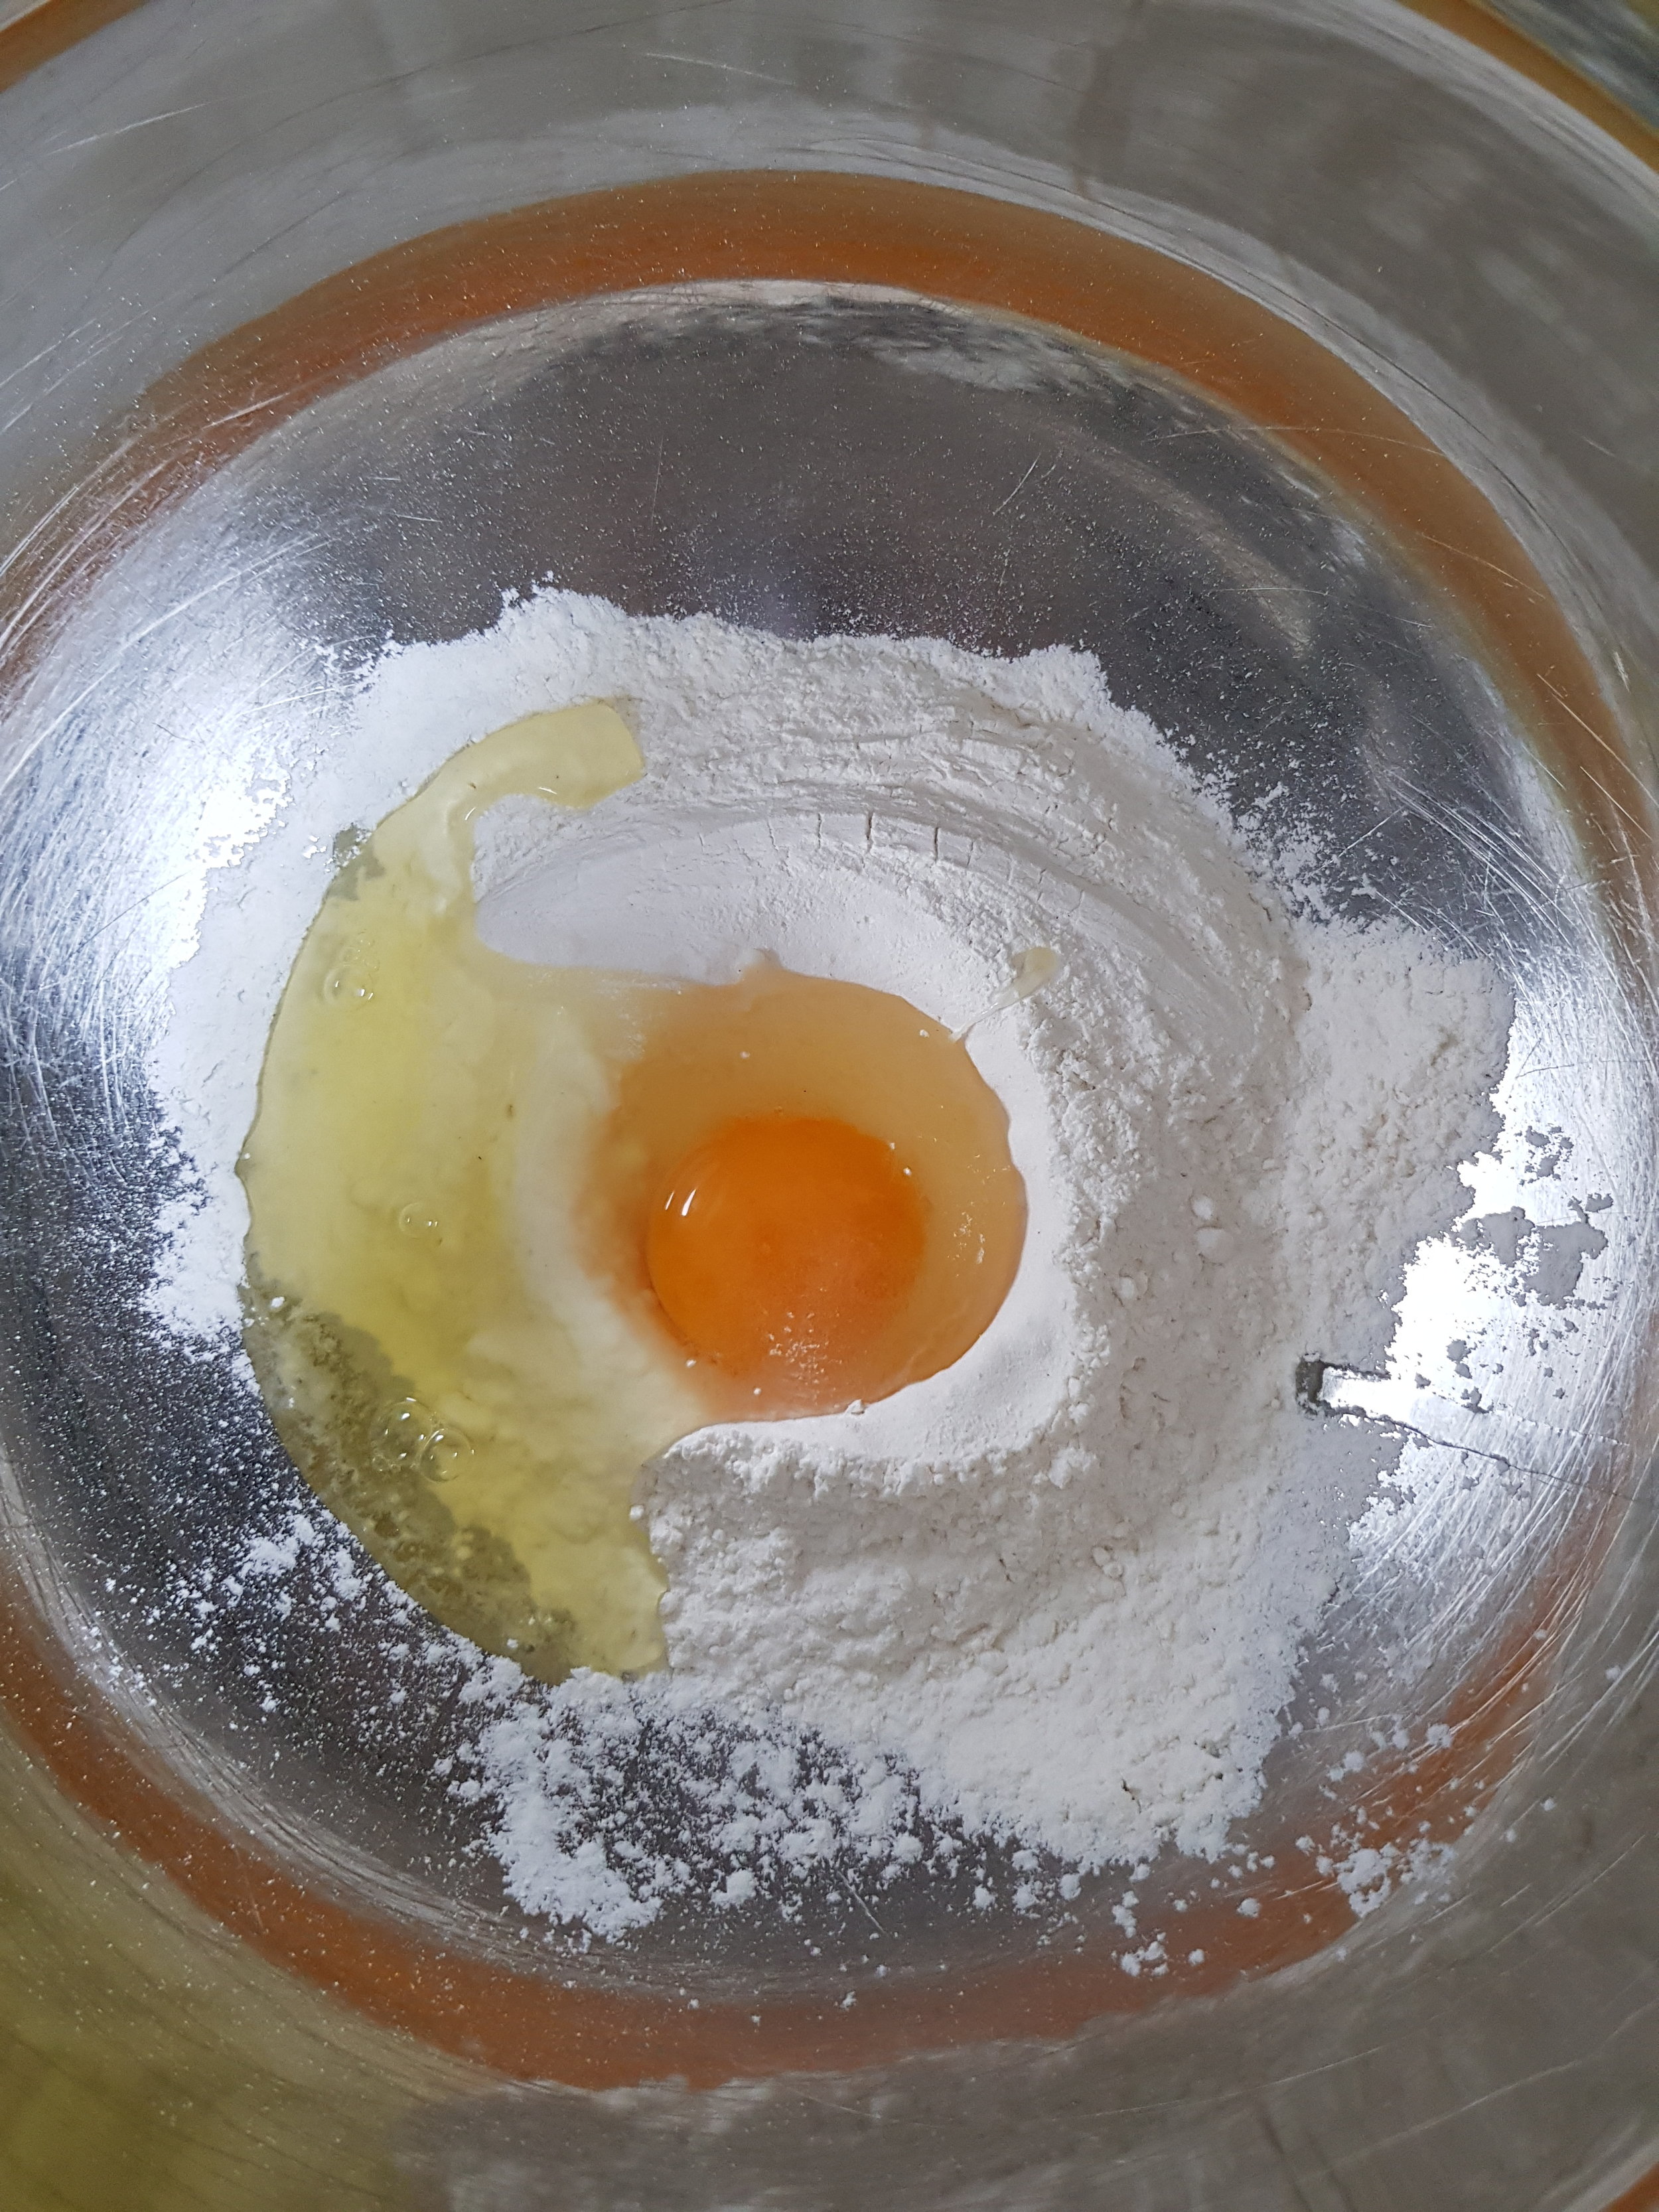 Mix the egg and flour